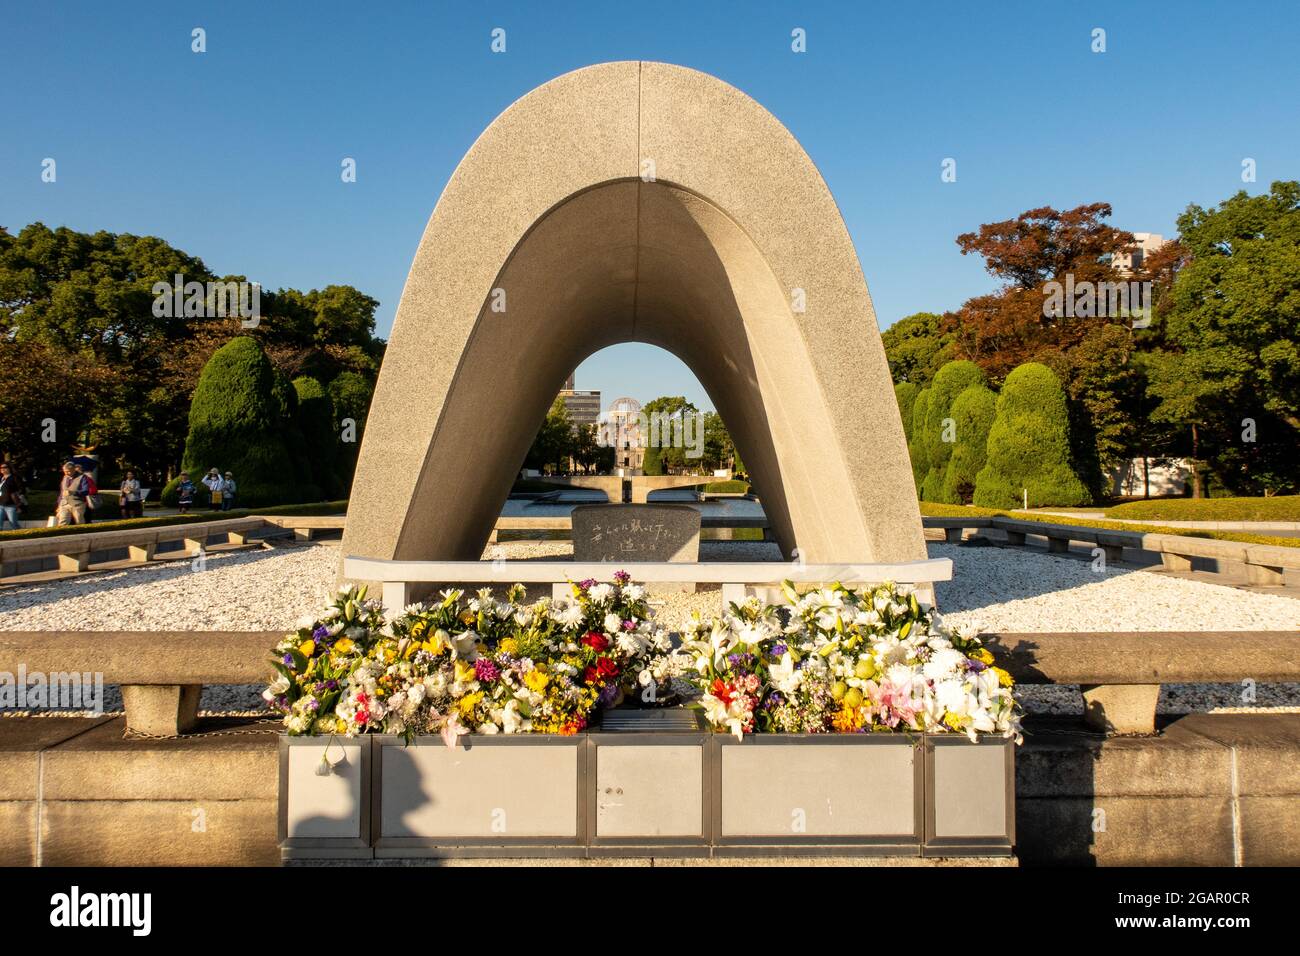 HIROSHIMA, Japan, 31.10.2019. The Hiroshima Victims Memorial Cenotaph with view of Atomic Bomb Dome in Peace Memorial Park, Hiroshima, Japan. Stock Photo